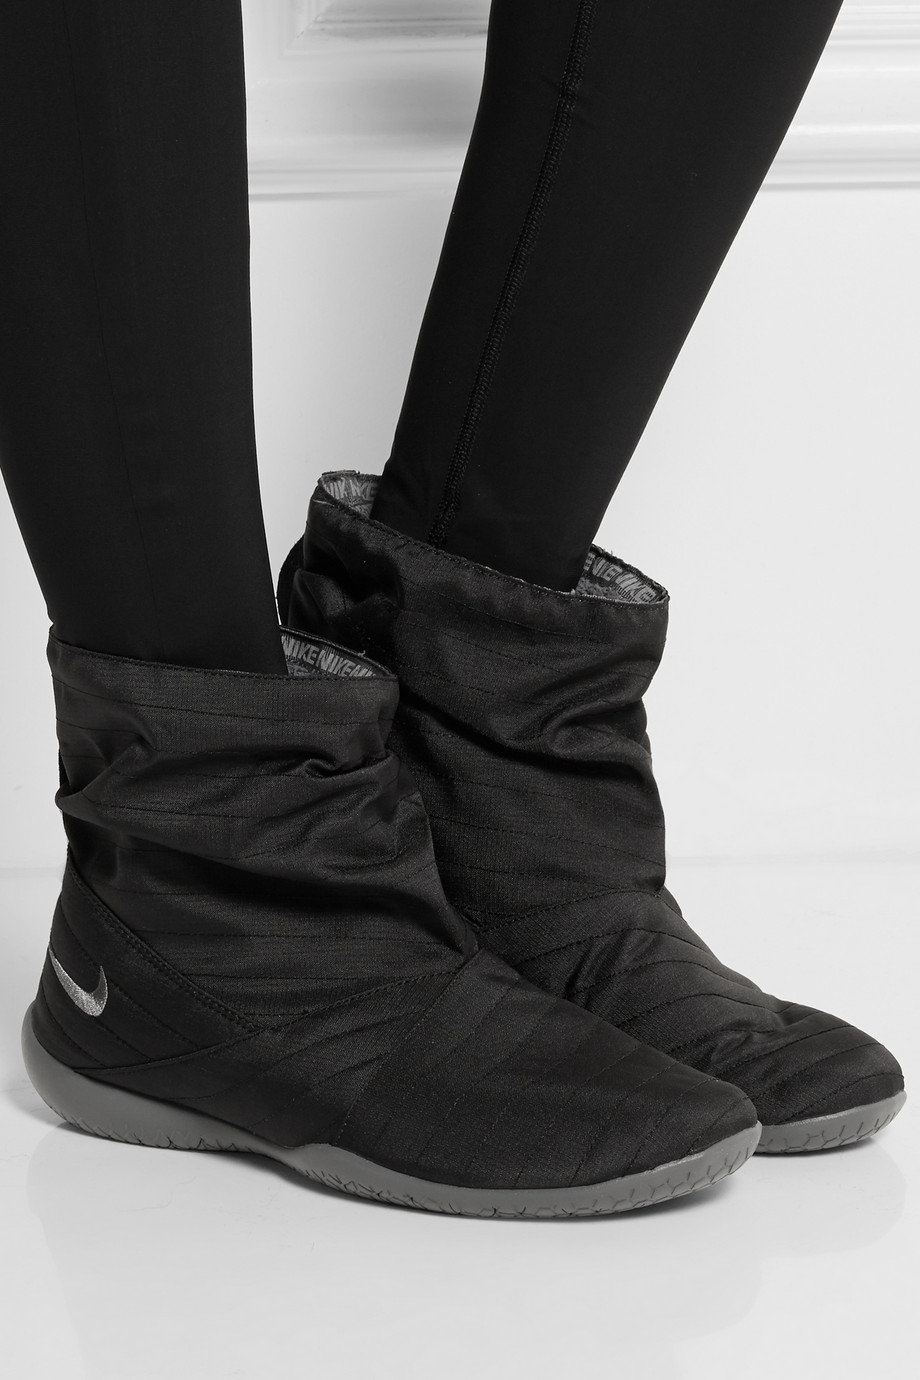 Nike Studio Mid Pack Yoga Shoe And Outdoor in Black | Lyst